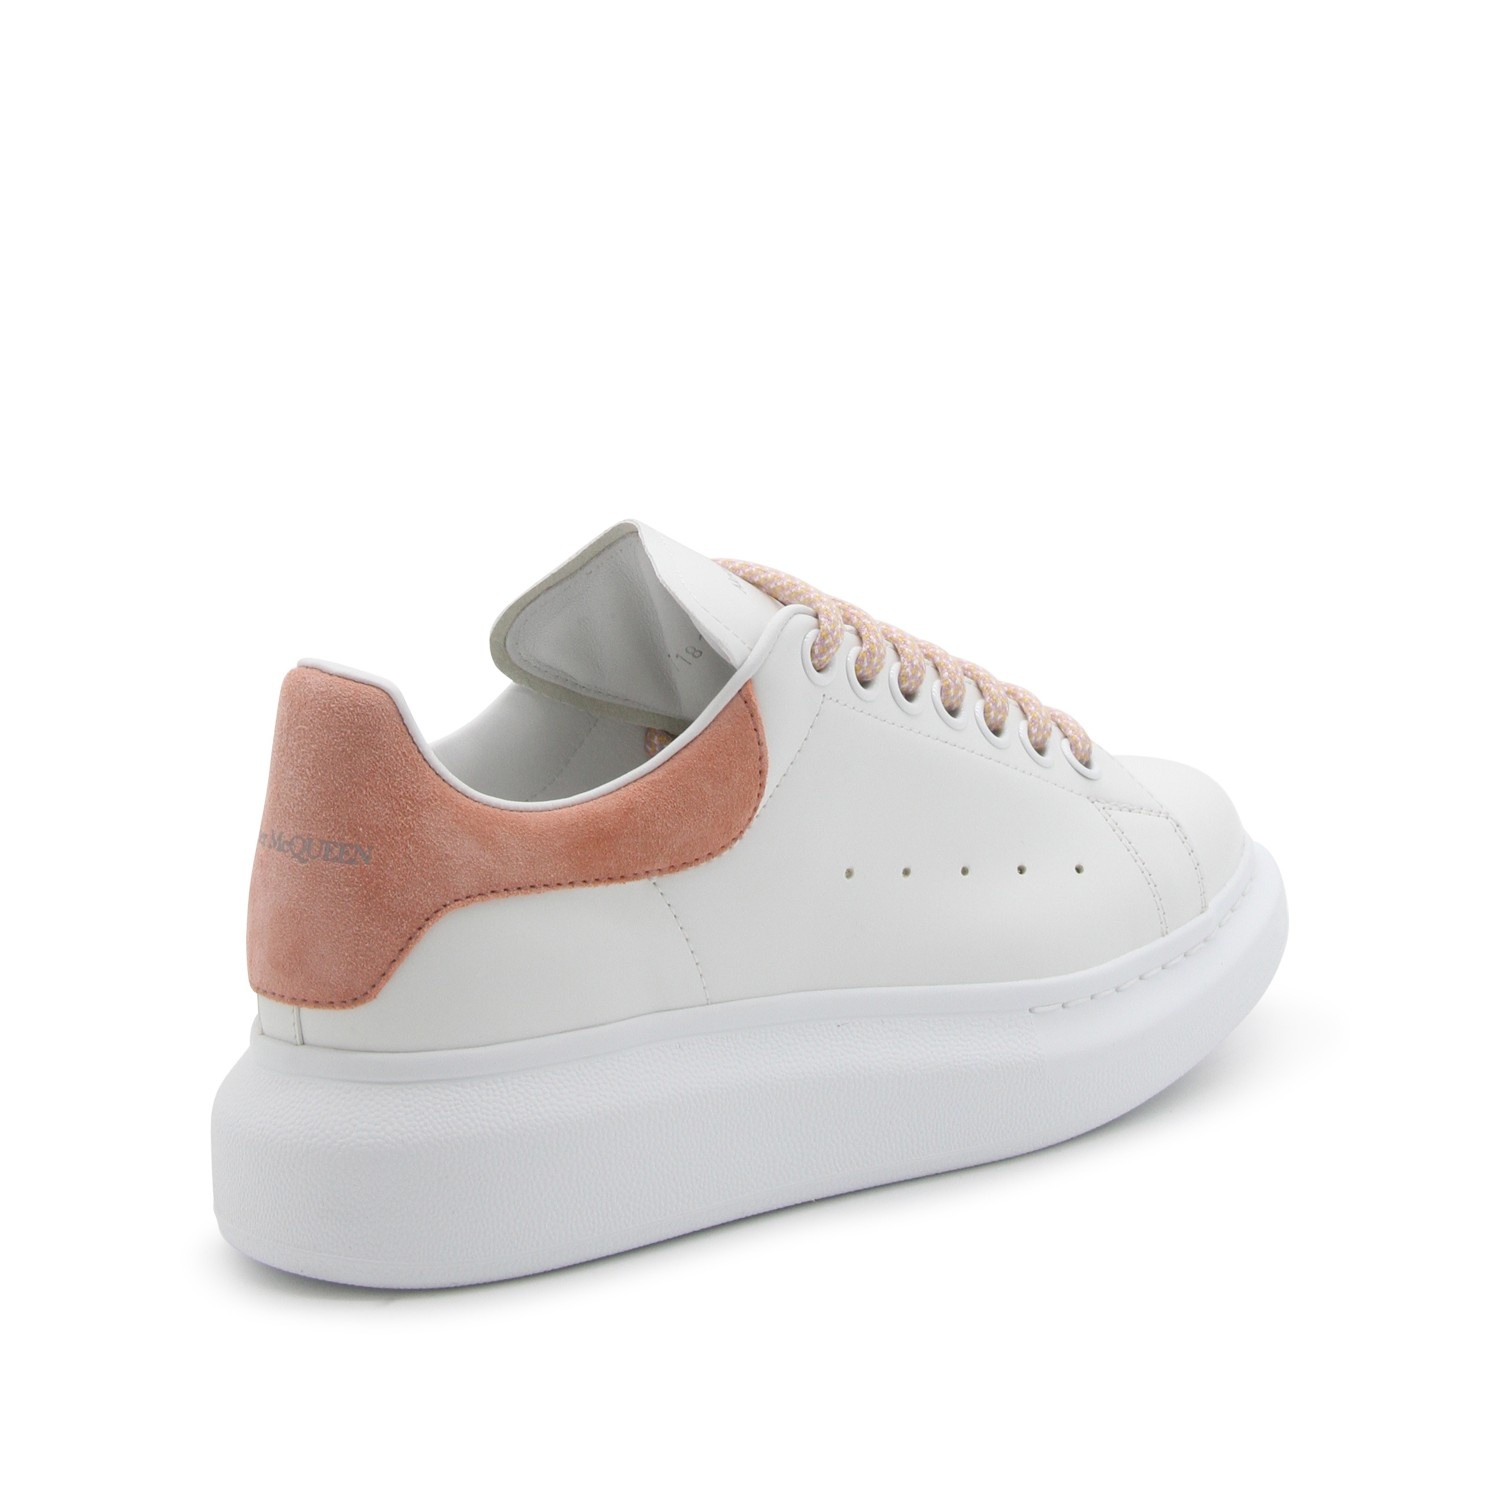 WHITE LEATHER AND PINK SUEDE OVERSIZED SNEAKERS - 3